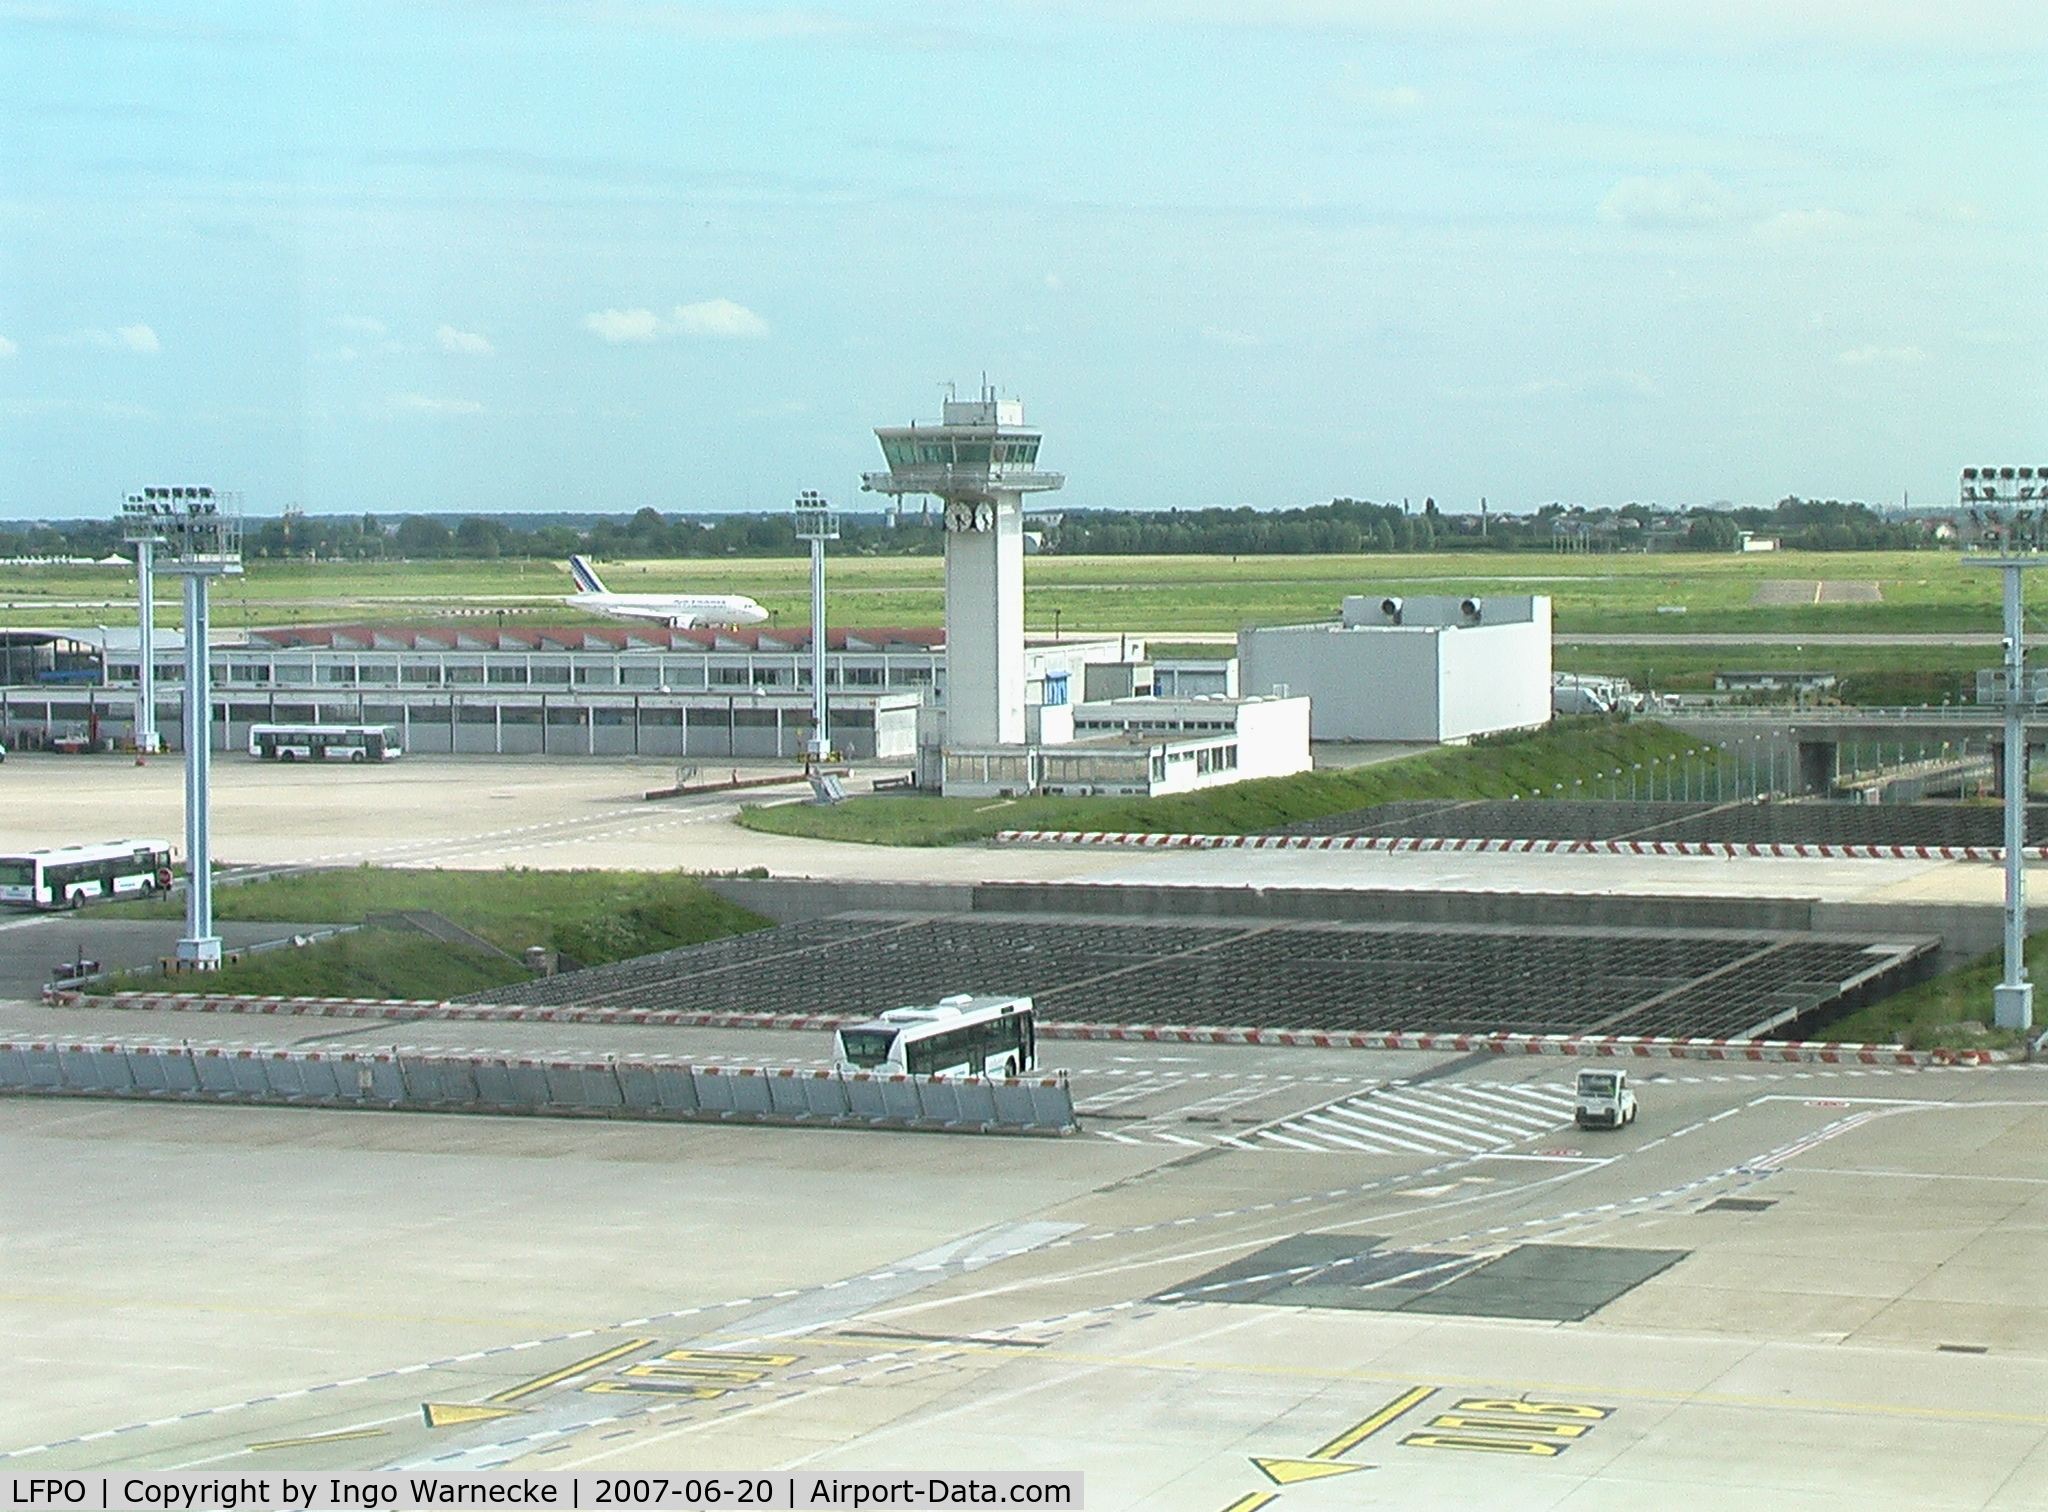 Paris Orly Airport, Orly (near Paris) France (LFPO) - Paris Orly - taxiways and small tower